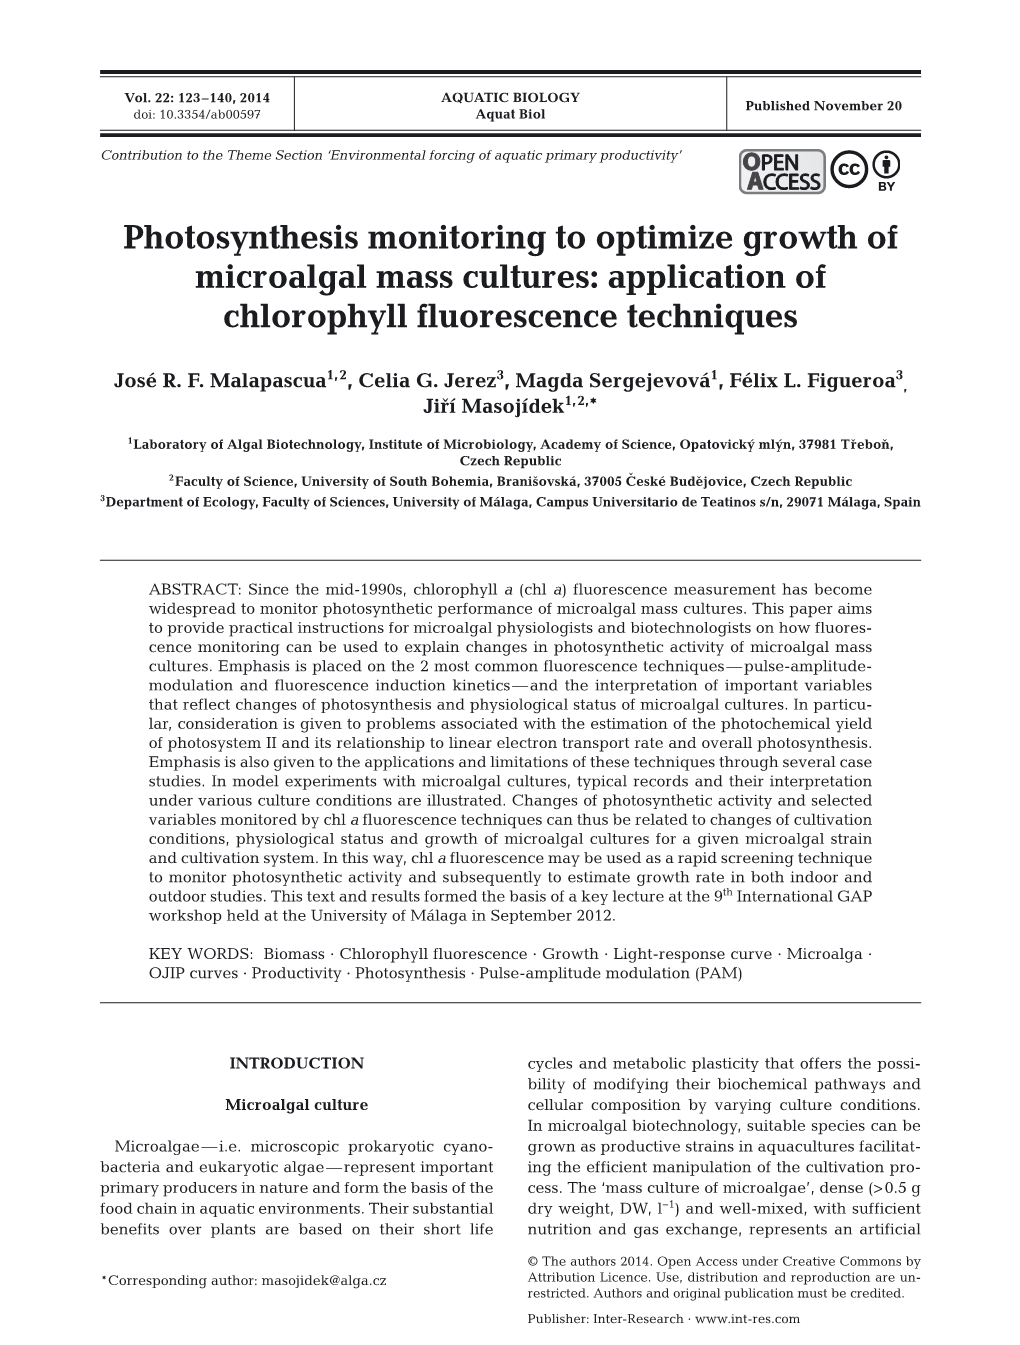 Photosynthesis Monitoring to Optimize Growth of Microalgal Mass Cultures: Application of Chlorophyll Fluorescence Techniques